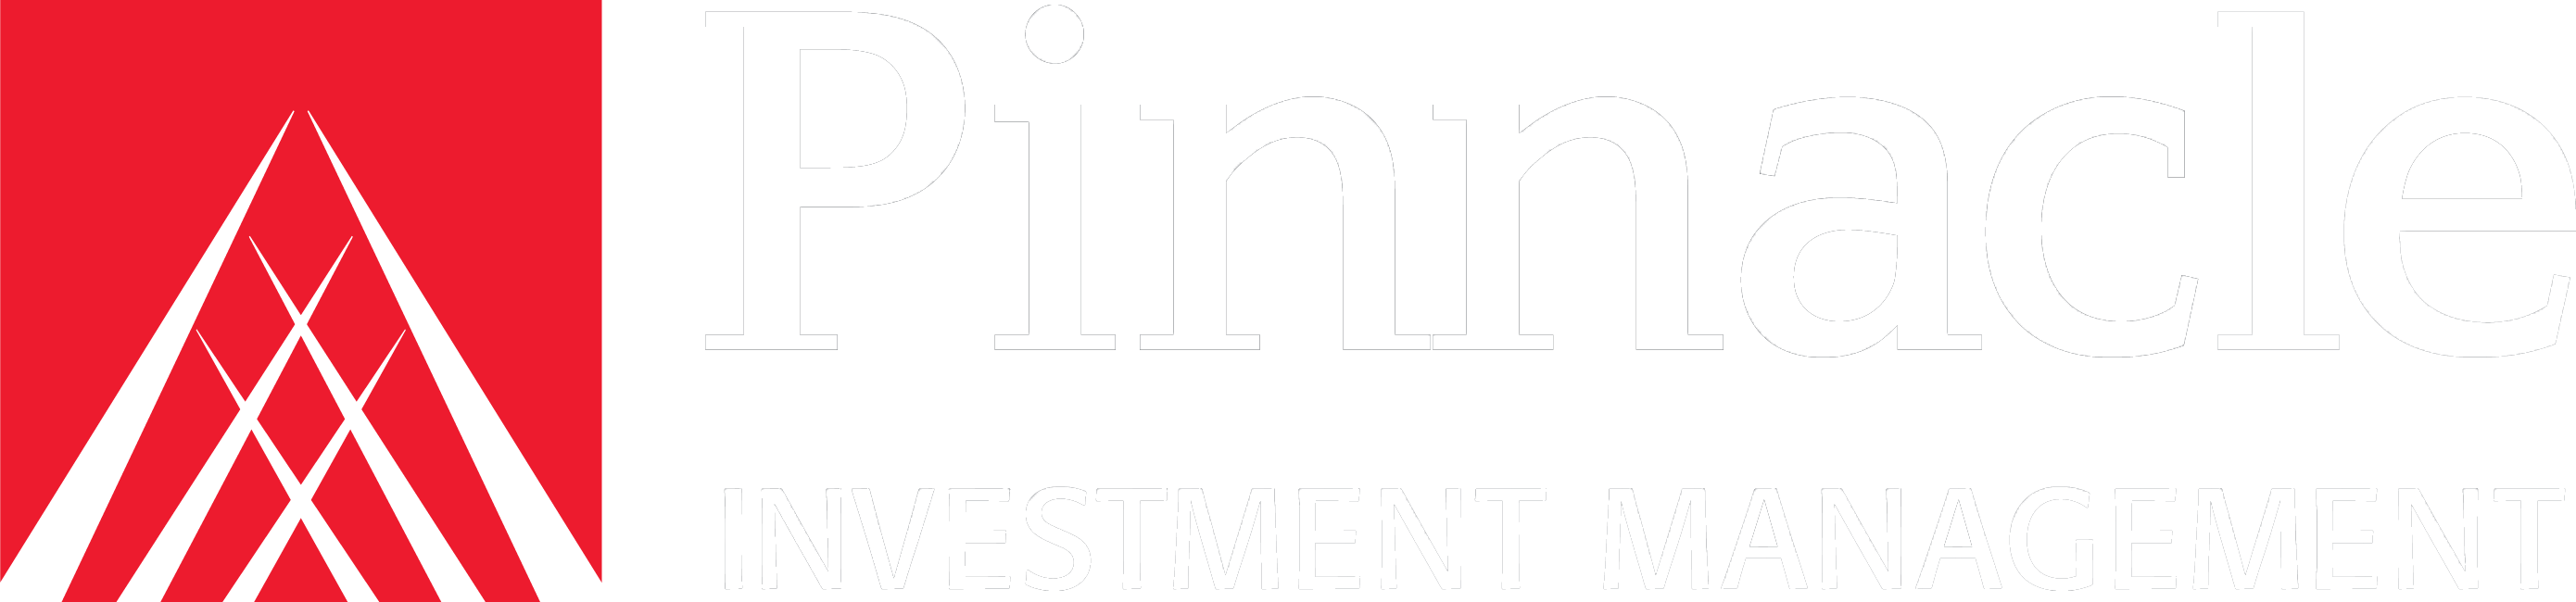 Pinnacle Investment Management